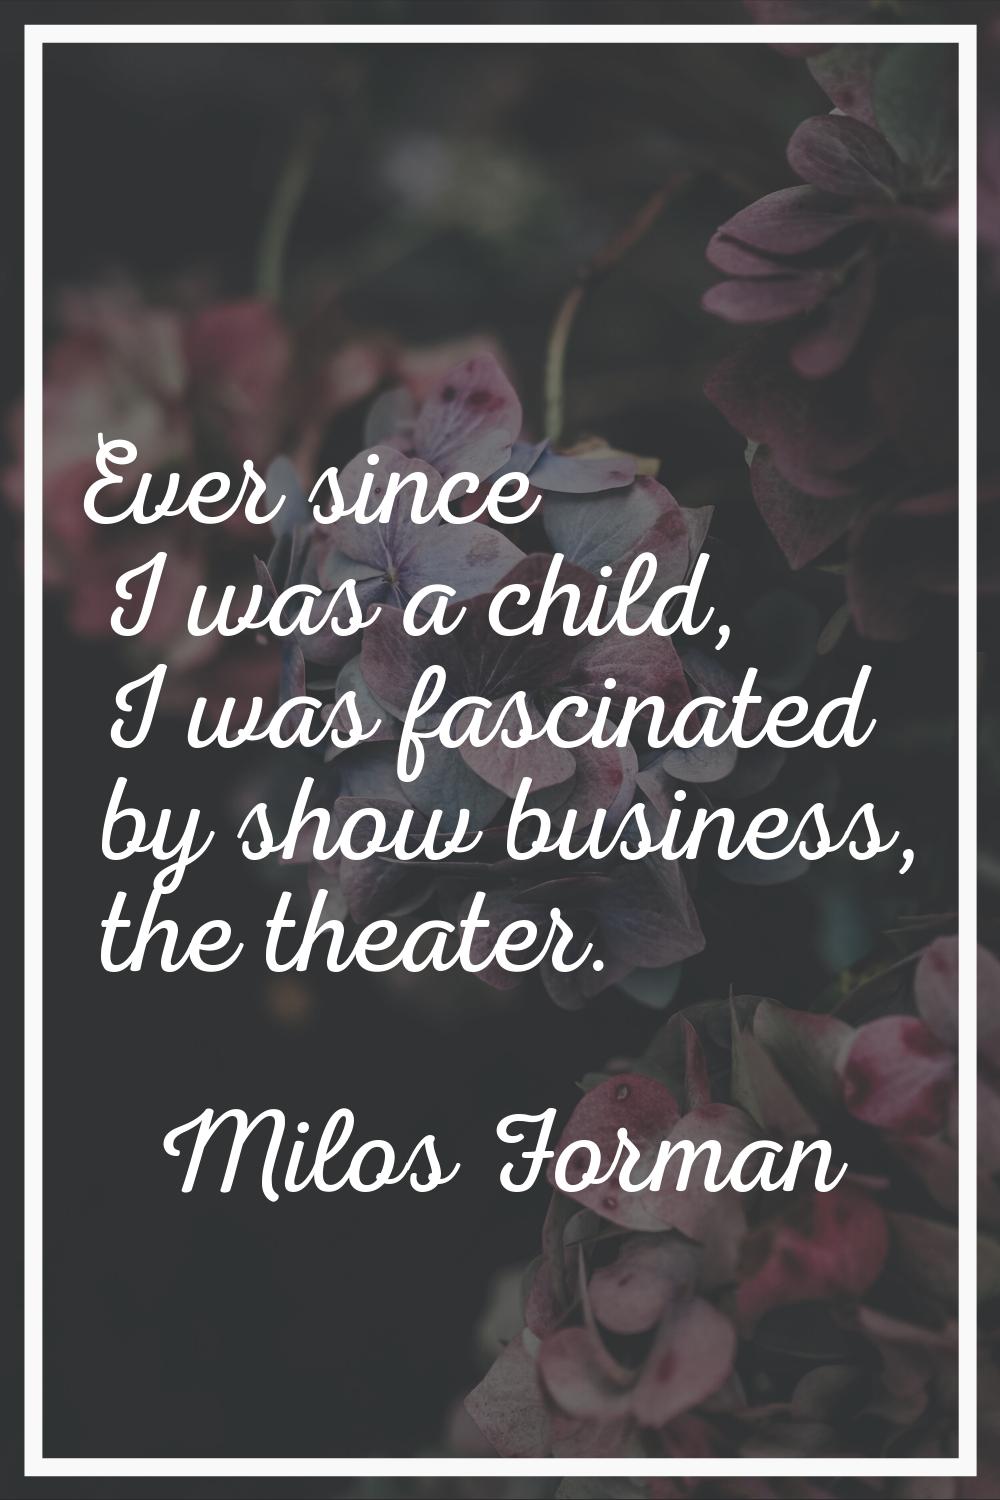 Ever since I was a child, I was fascinated by show business, the theater.